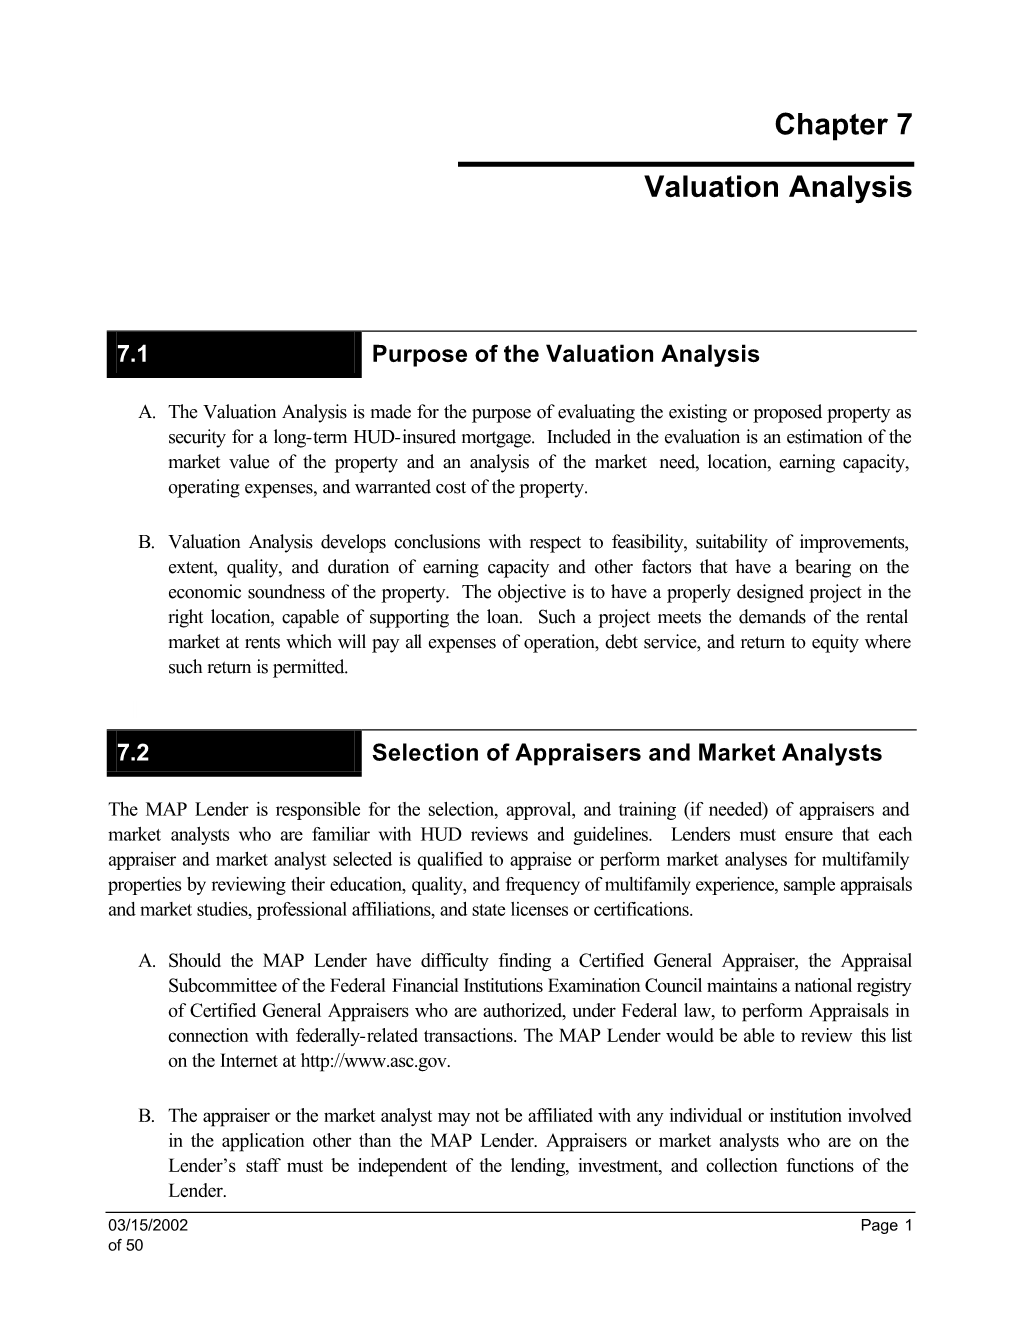 Chapter 7 Valuation Analysis